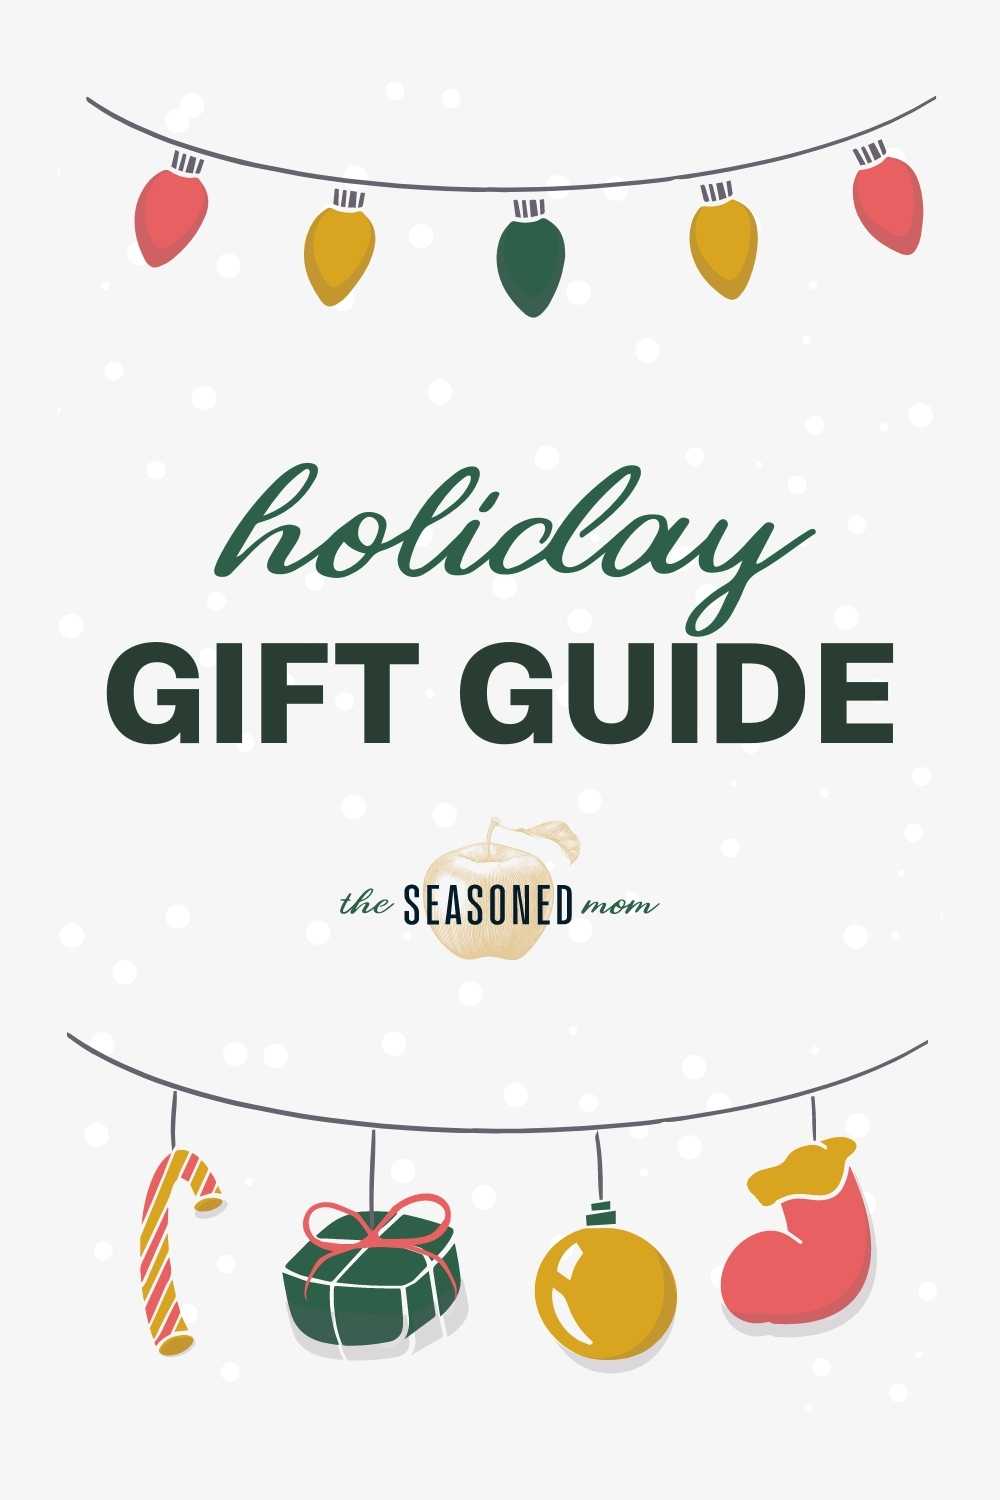 Pinterest collage image of holiday gift guide